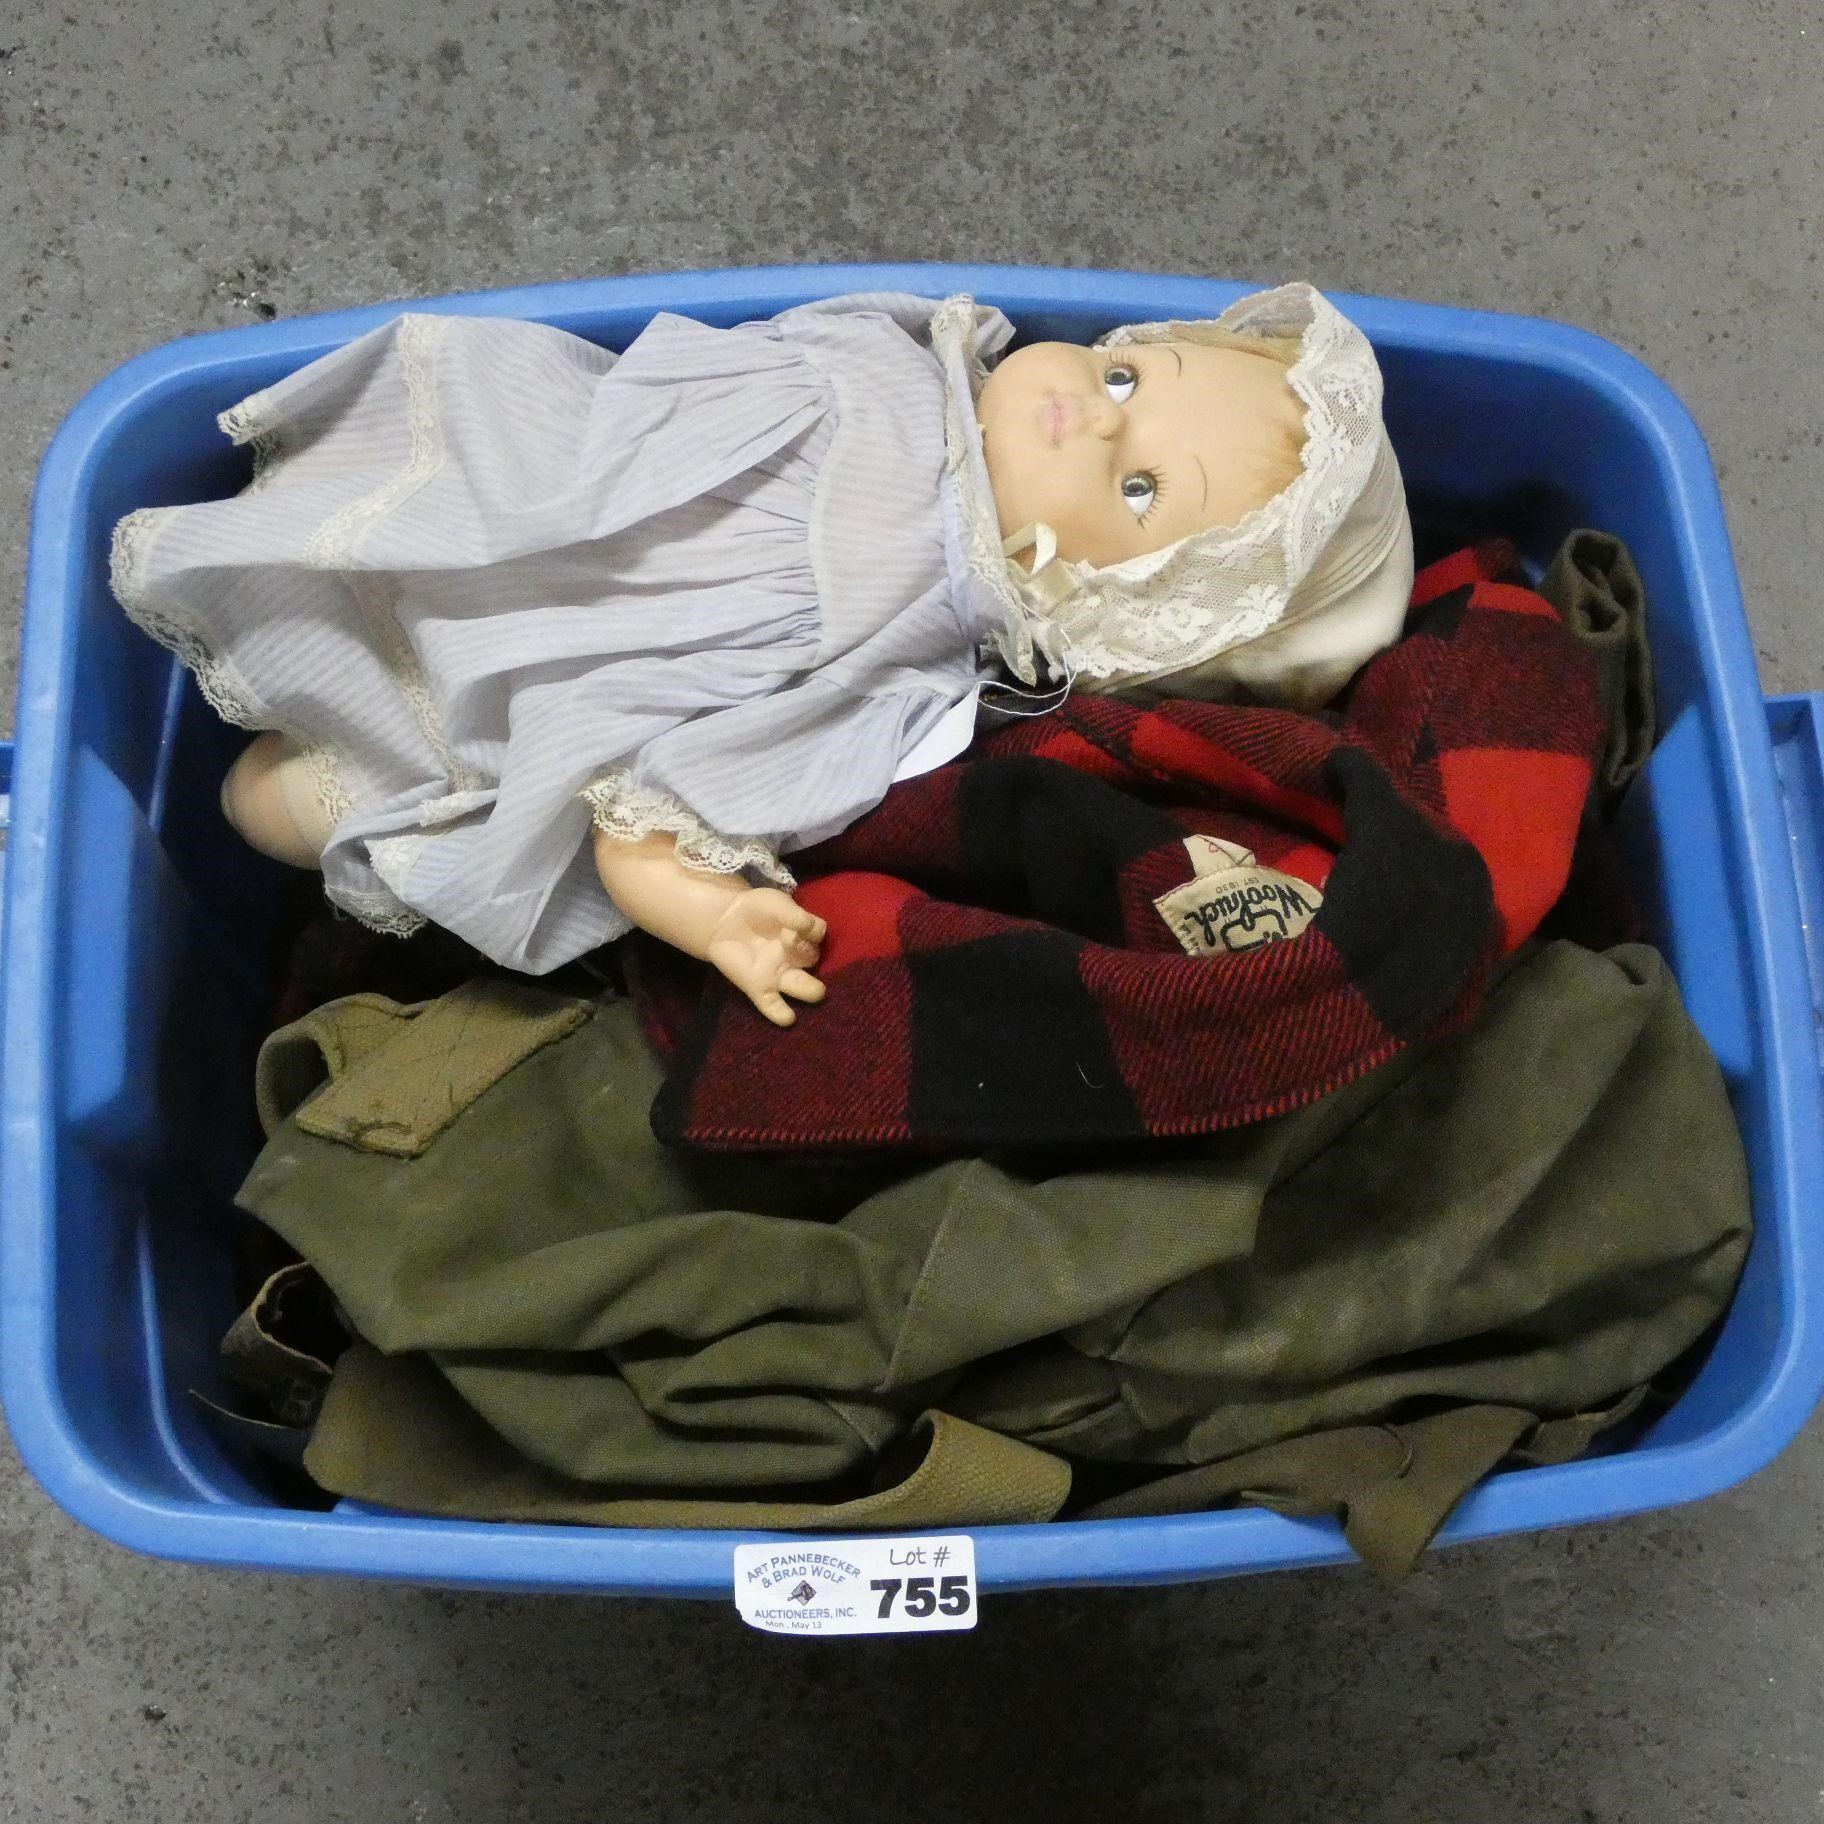 Woolrich Clothing, Doll, Military Duffle Bag